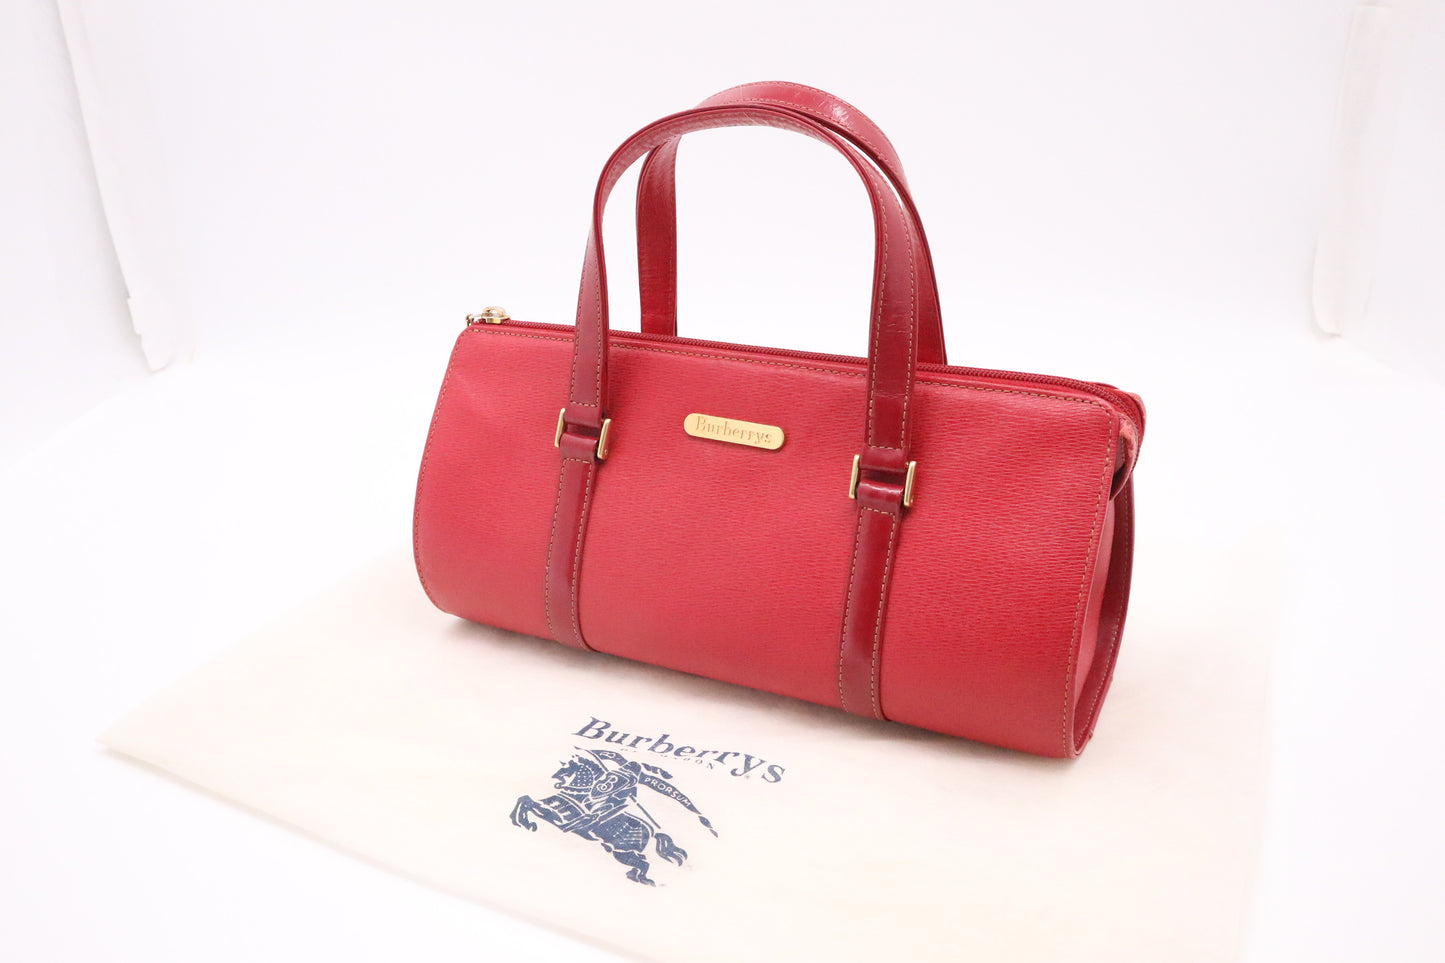 Burberry Round Handbag in Red Leather